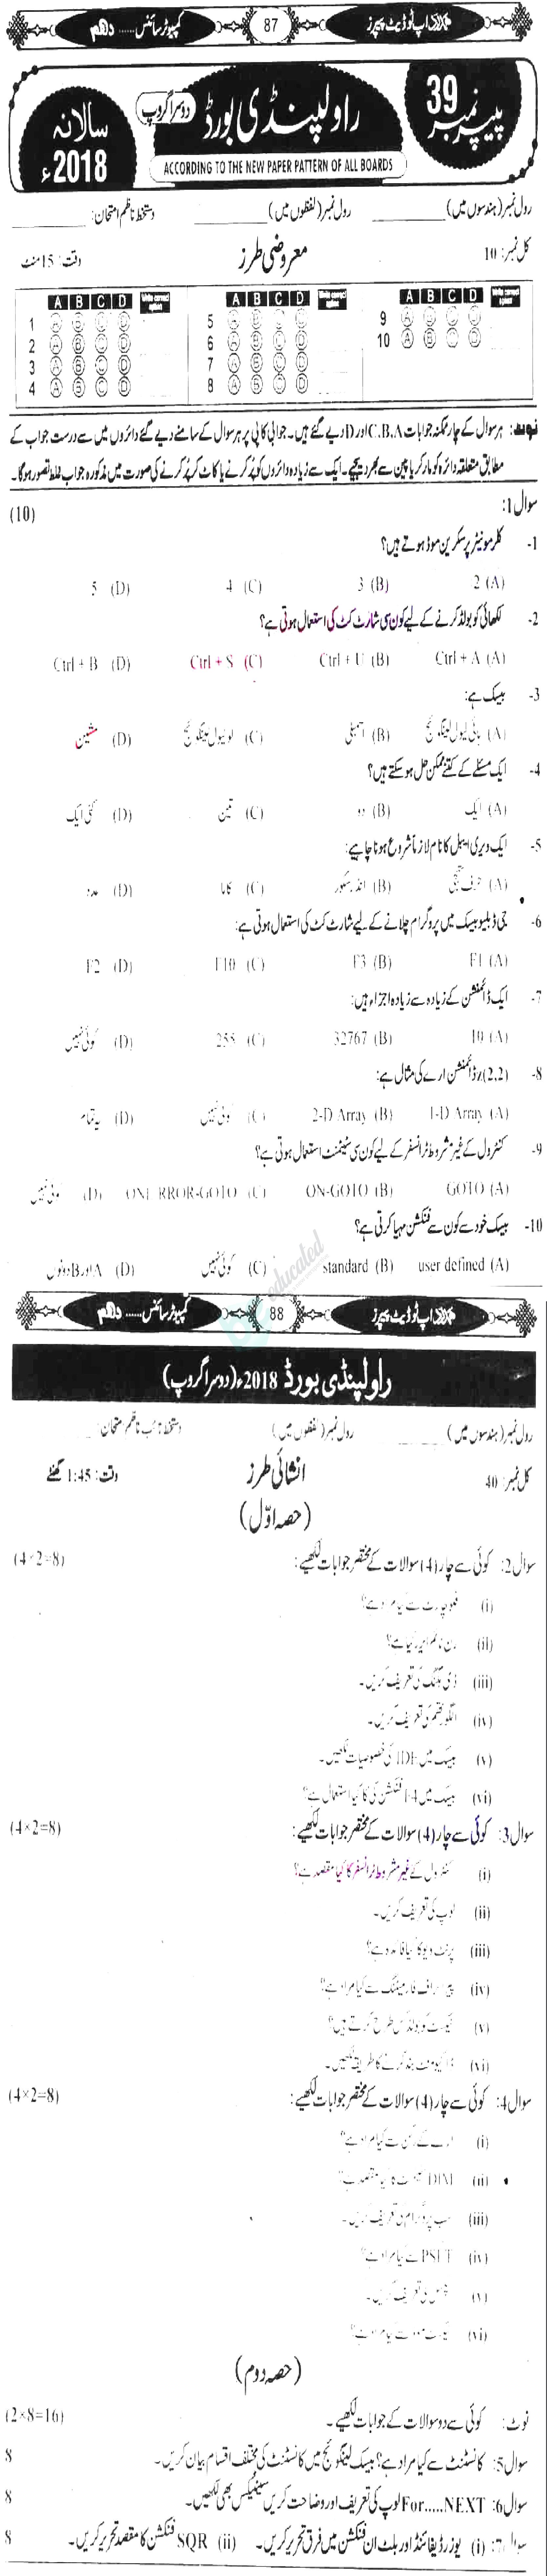 Computer Science 10th class Past Paper Group 2 BISE Rawalpindi 2018